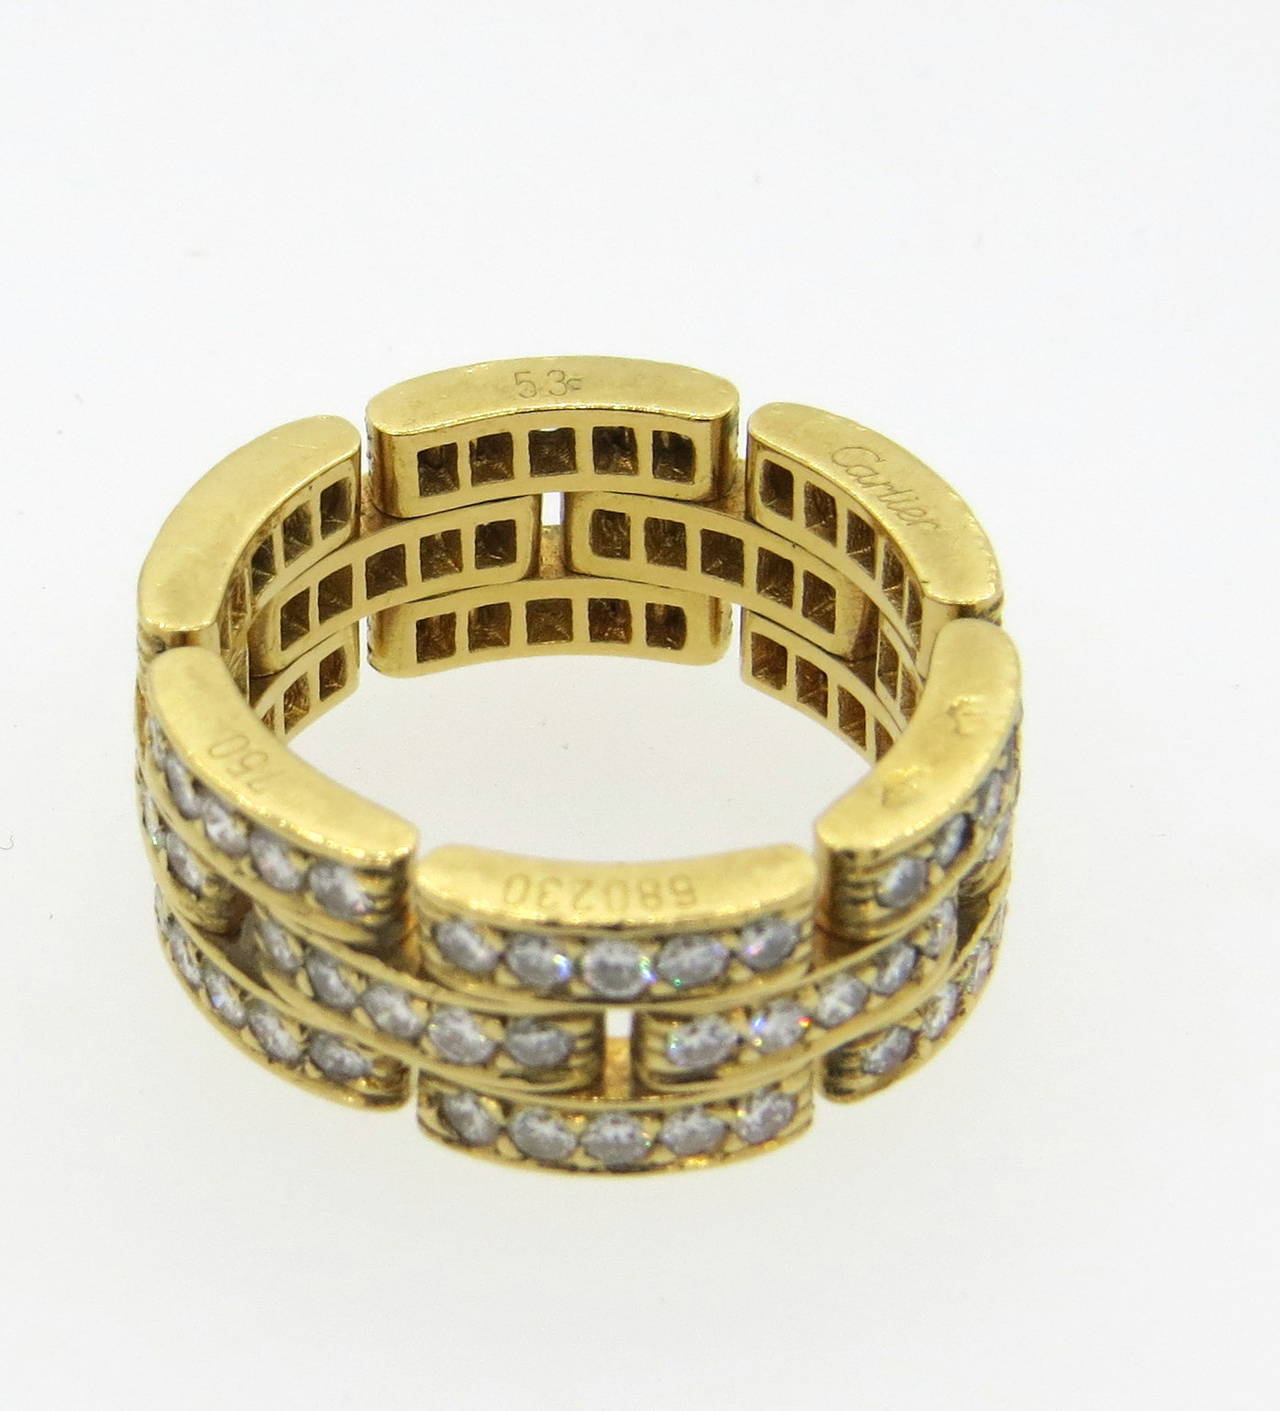 An 18k yellow gold ring set with approximately 1.40cts in G/VS diamonds.  Crafted by Cartier for there Maillon Panthere collection, the ring is a size 6 and weighs 10.5 grams.  The ring is currently retailed by Cartier for $14700 plus tax.  Marked: